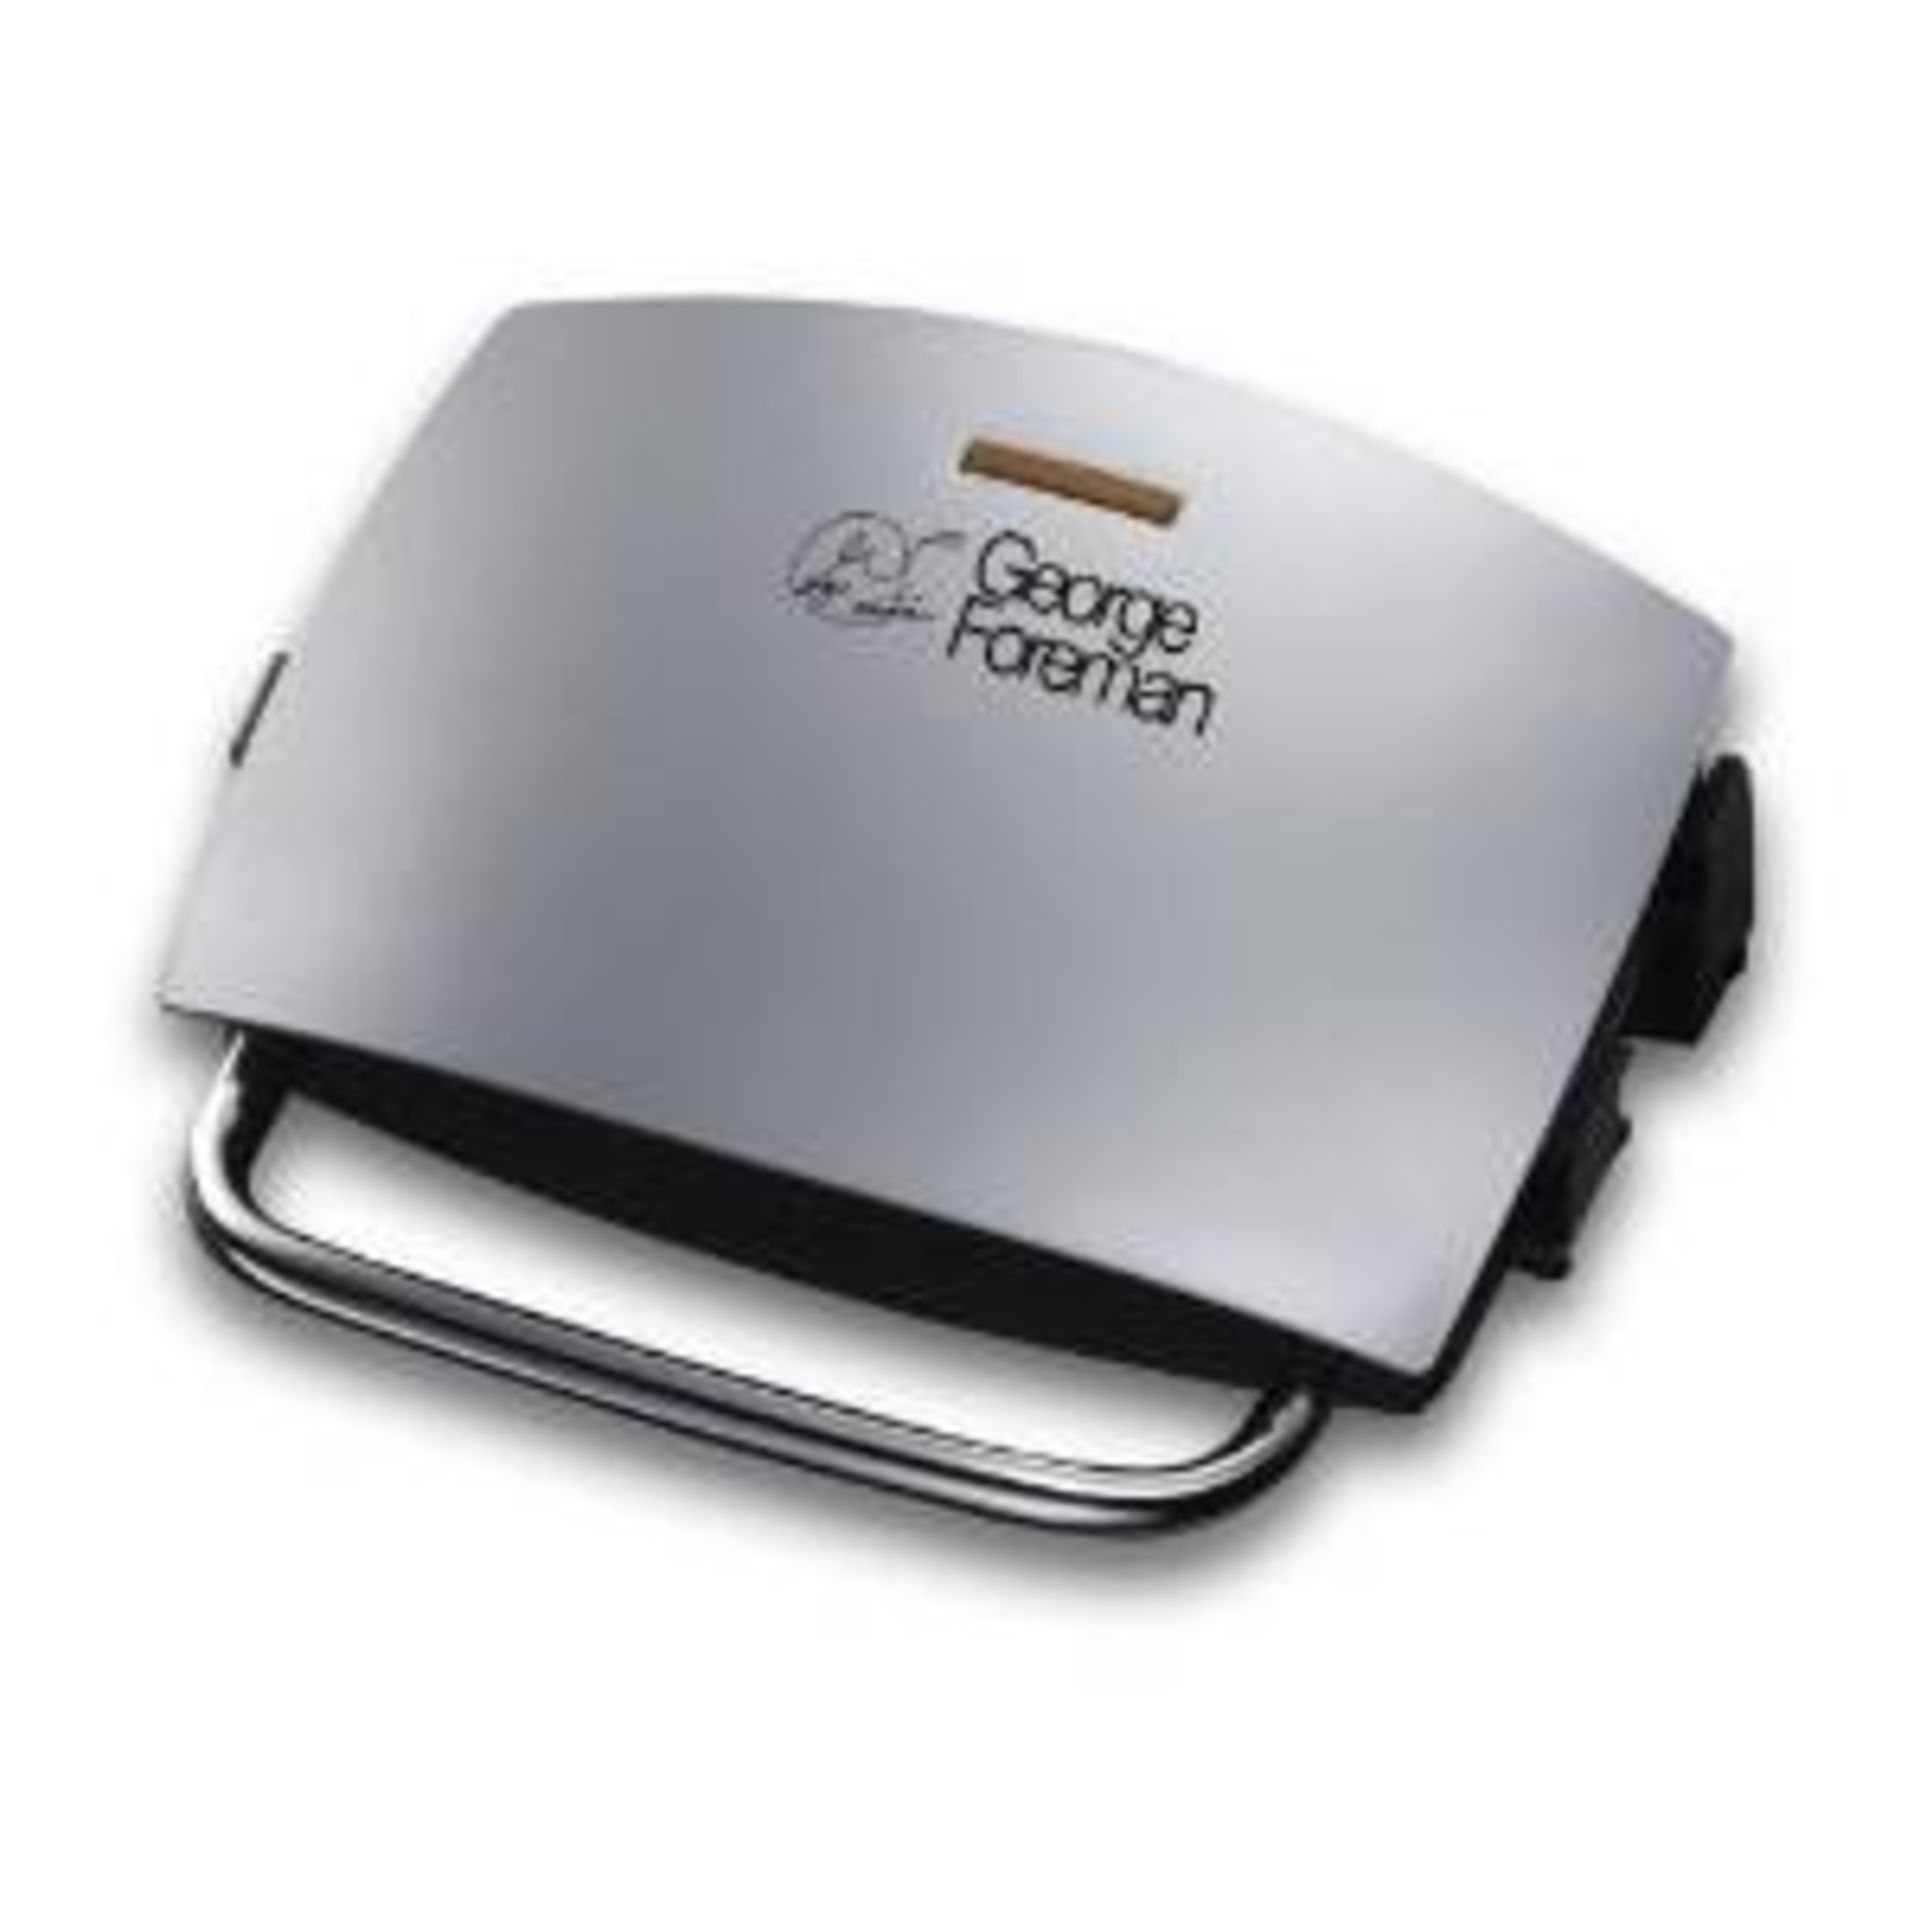 GEORGE FOREMAN GRILL 14181  4 portion - RRP £49.99